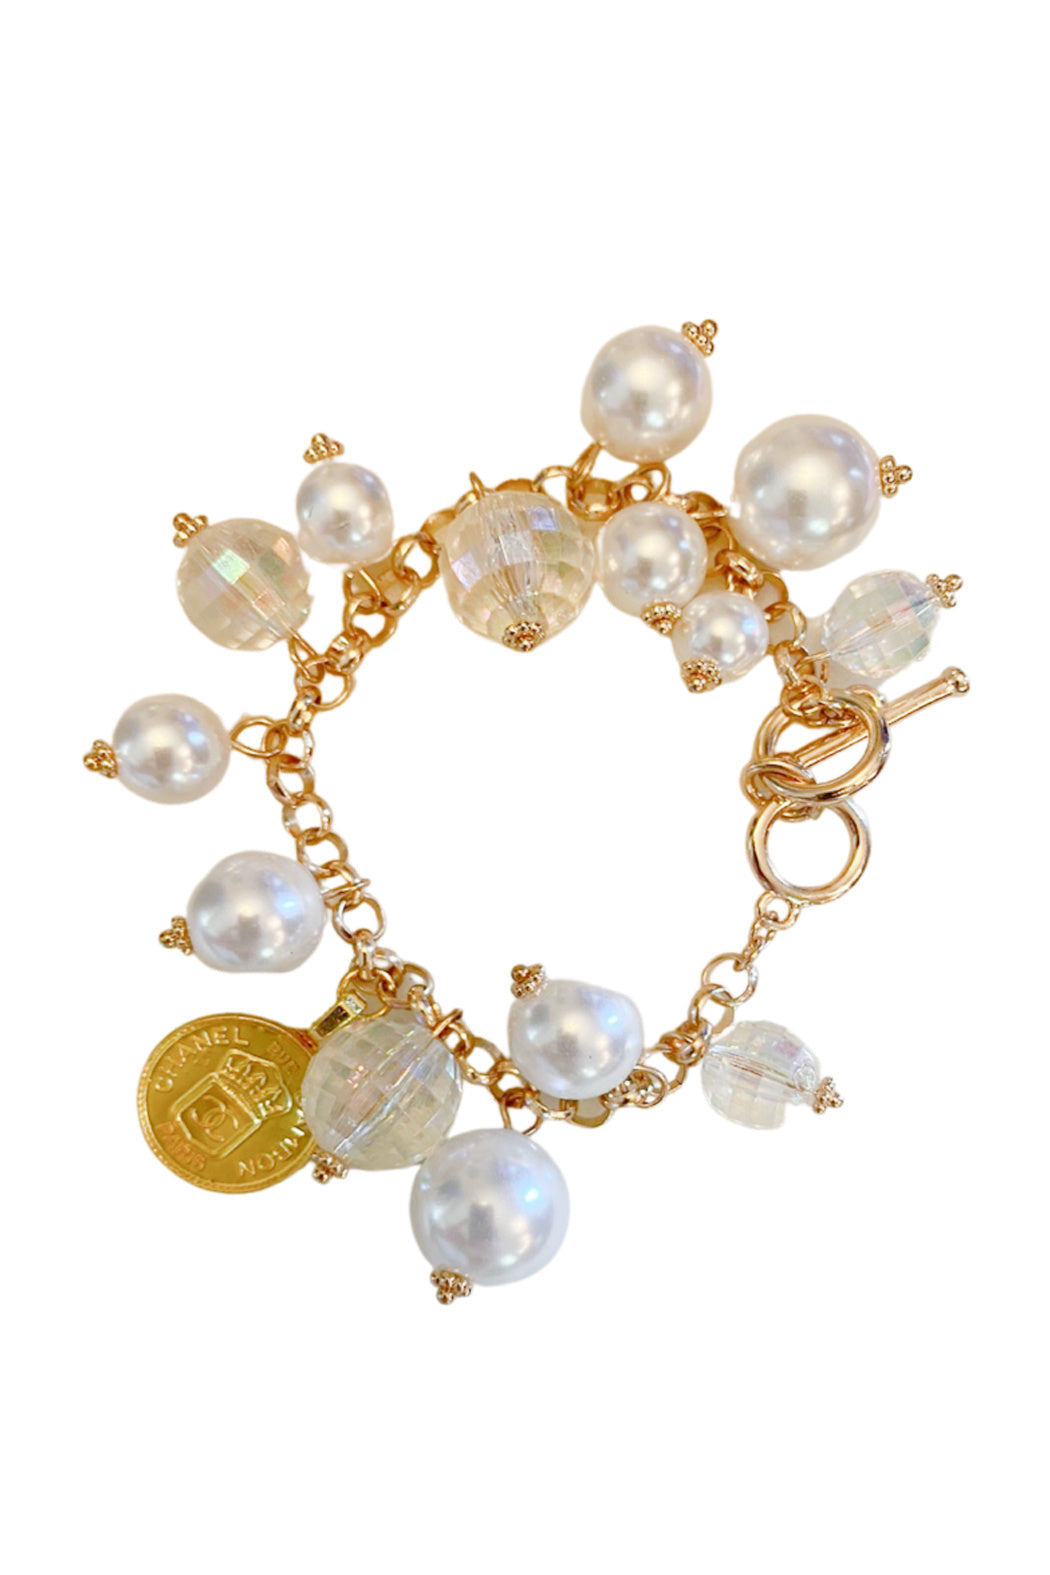 Pearl and Crystal Chanel Button Charm Bracelet